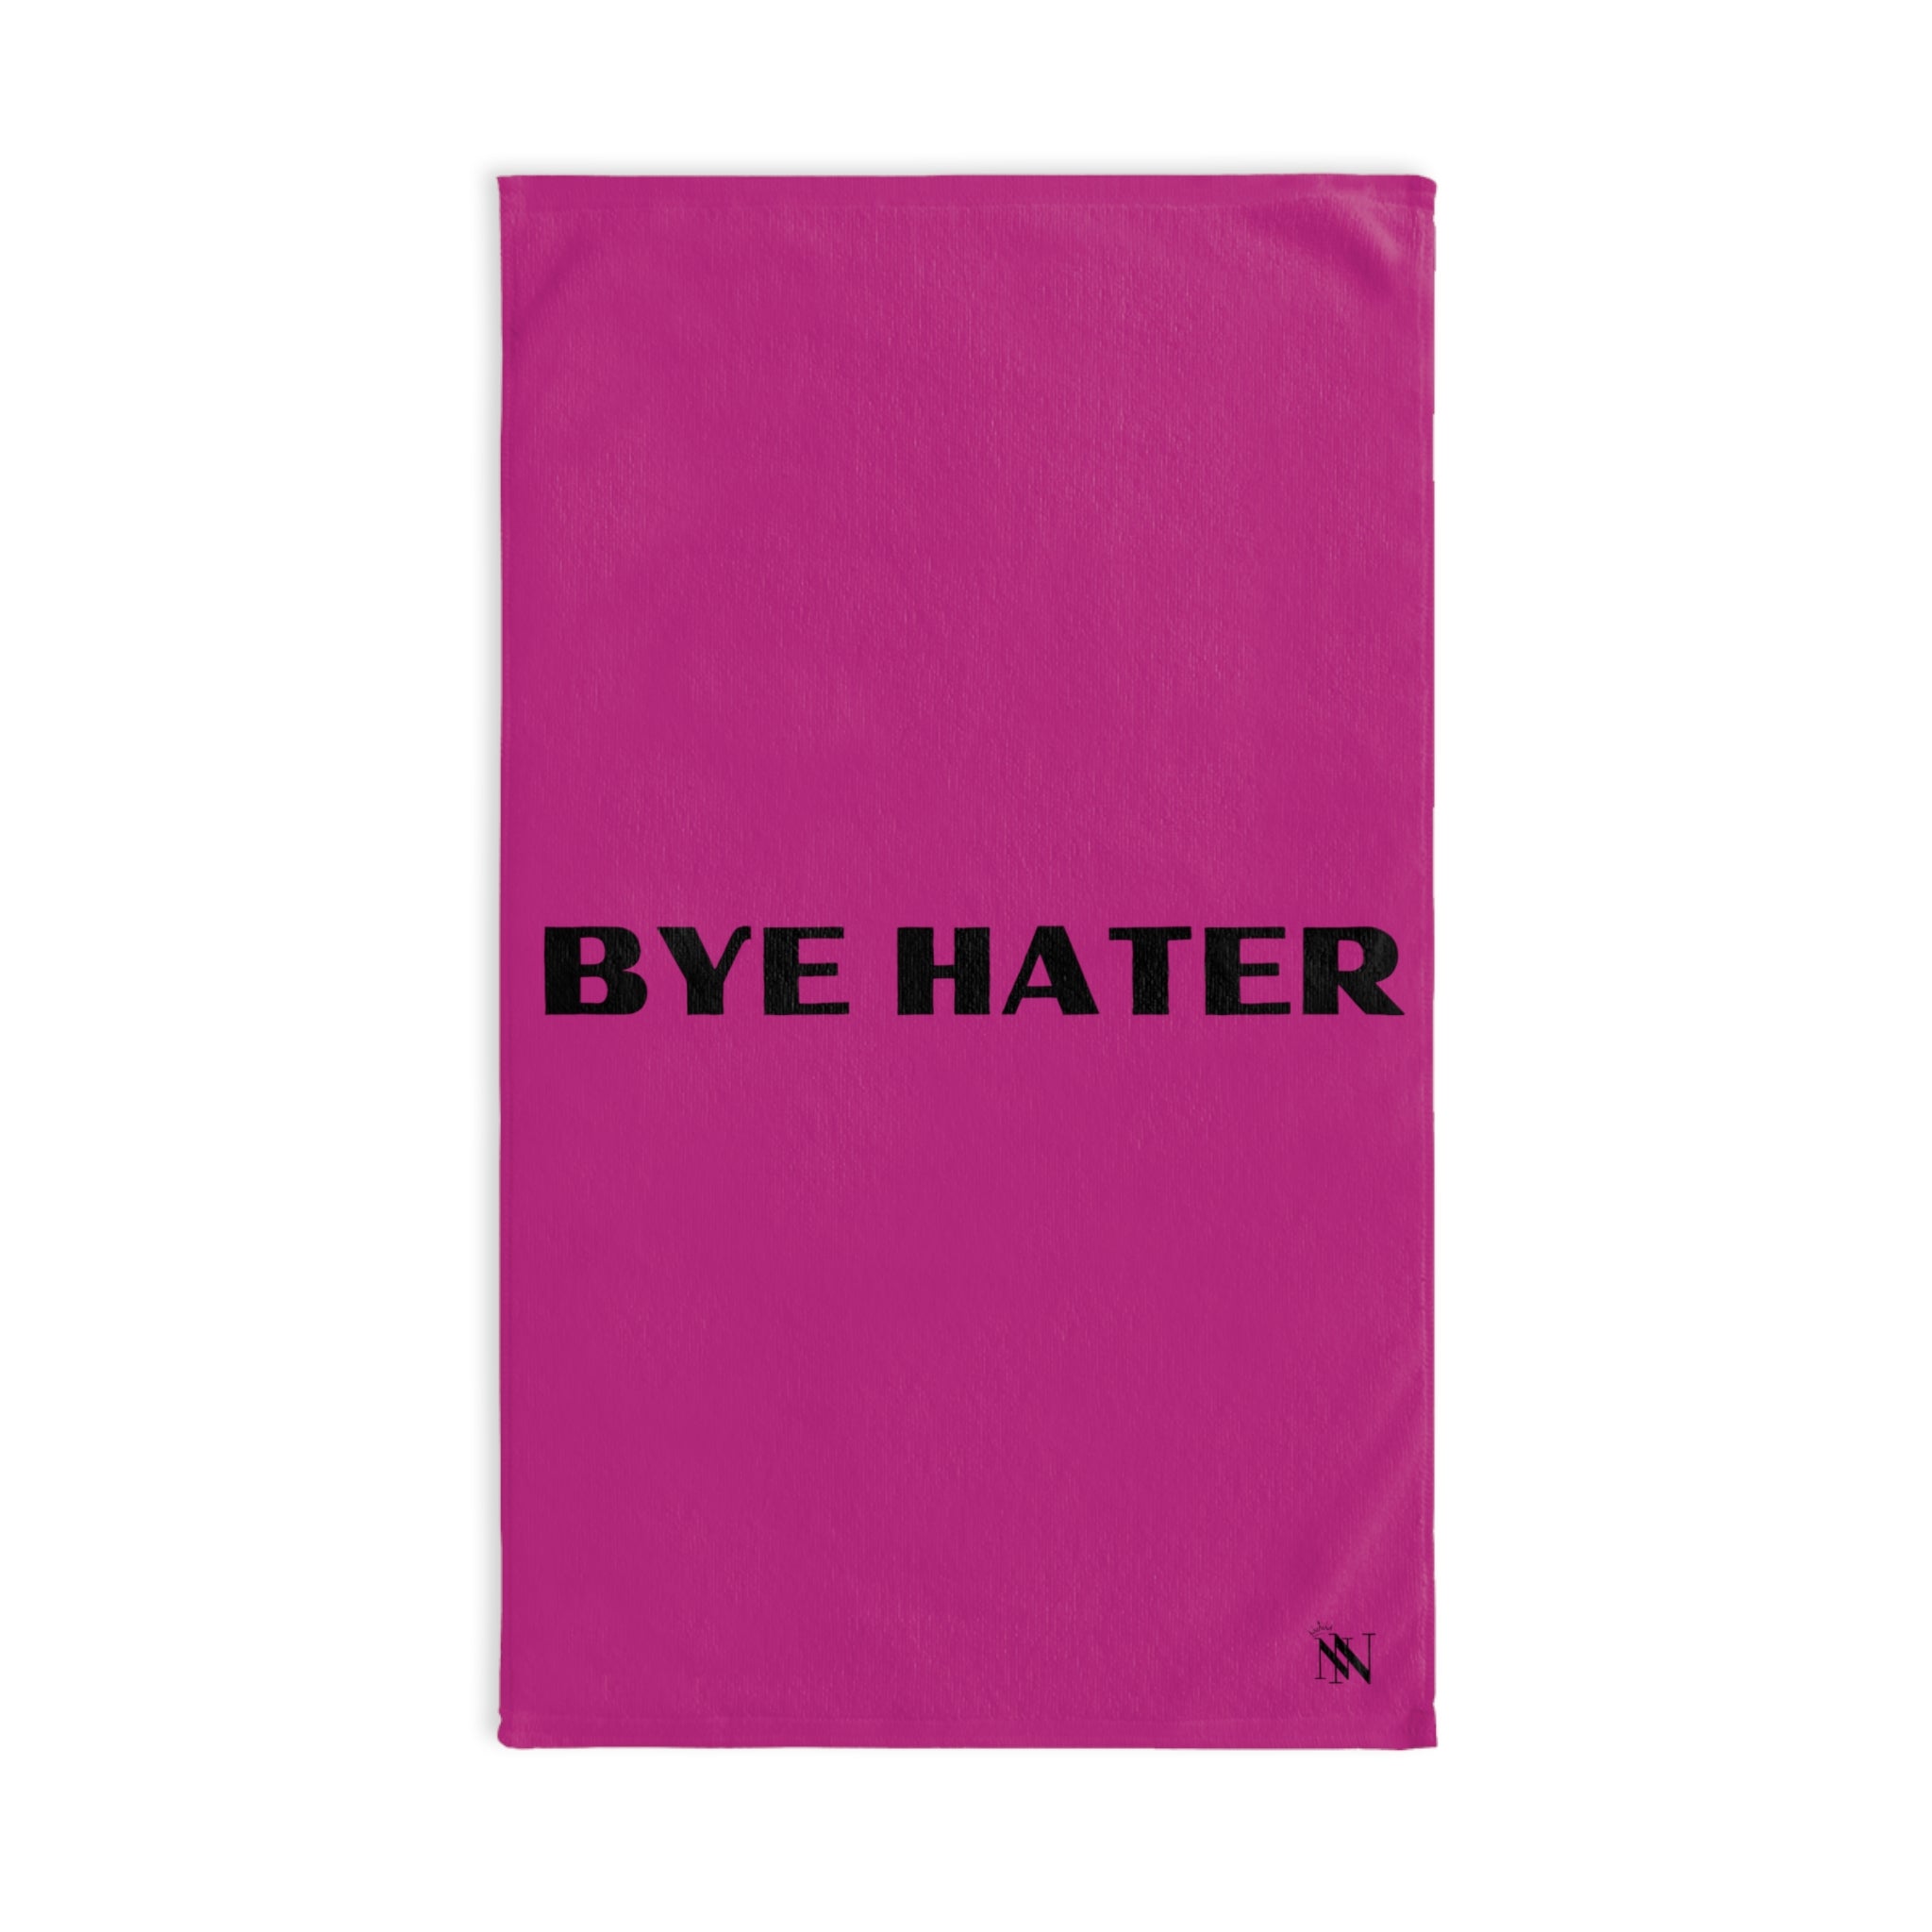 BYE Hater Fun Fuscia | Funny Gifts for Men - Gifts for Him - Birthday Gifts for Men, Him, Husband, Boyfriend, New Couple Gifts, Fathers & Valentines Day Gifts, Hand Towels NECTAR NAPKINS